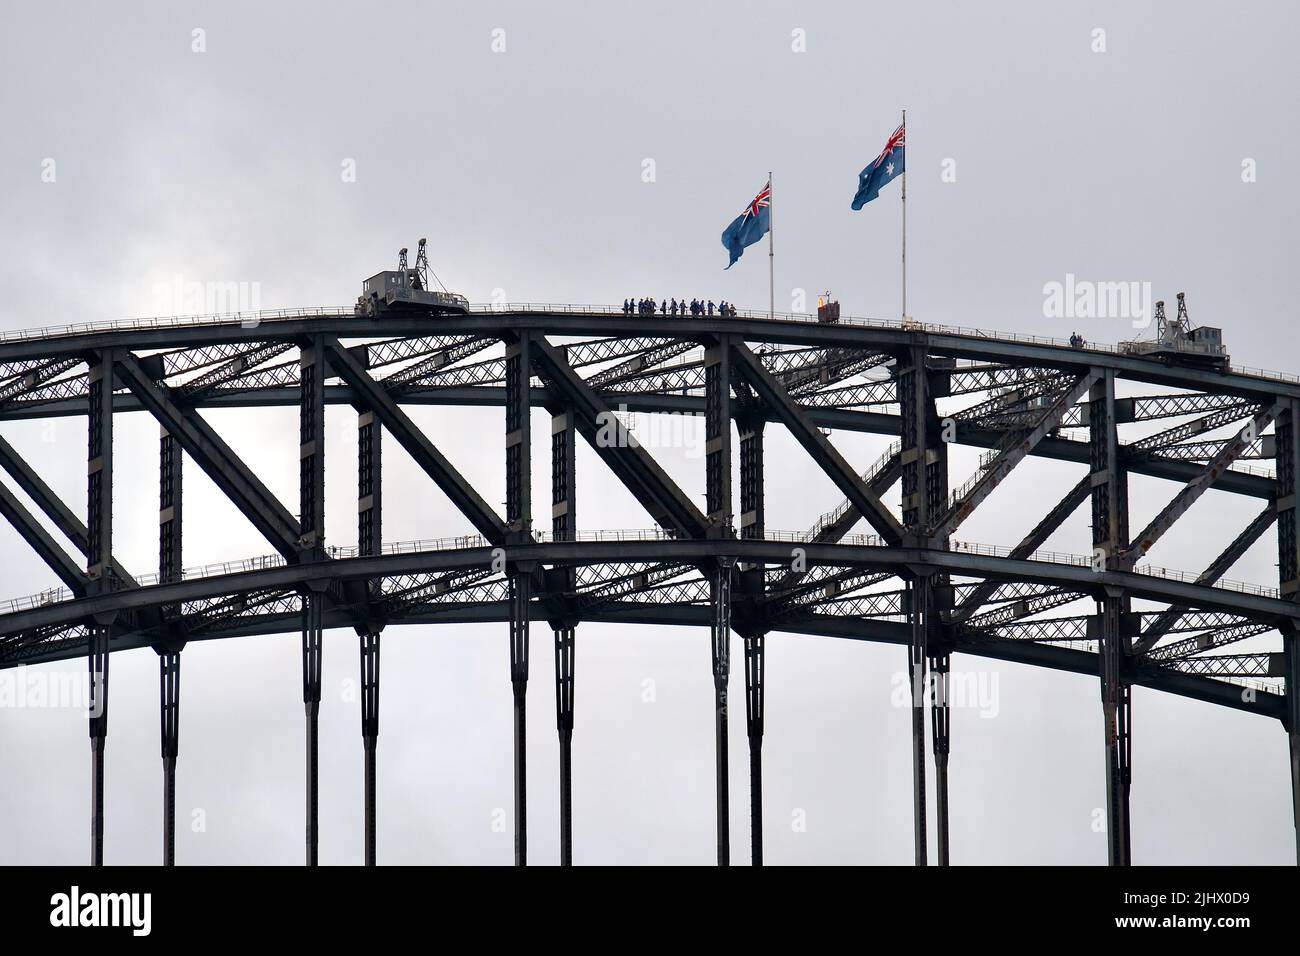 Tourists atop the upper arch of the Sydney Harbour Bridge in Sydney, Australia. Scaling the iconic 134m high bridge is a popular tourist activity. Stock Photo